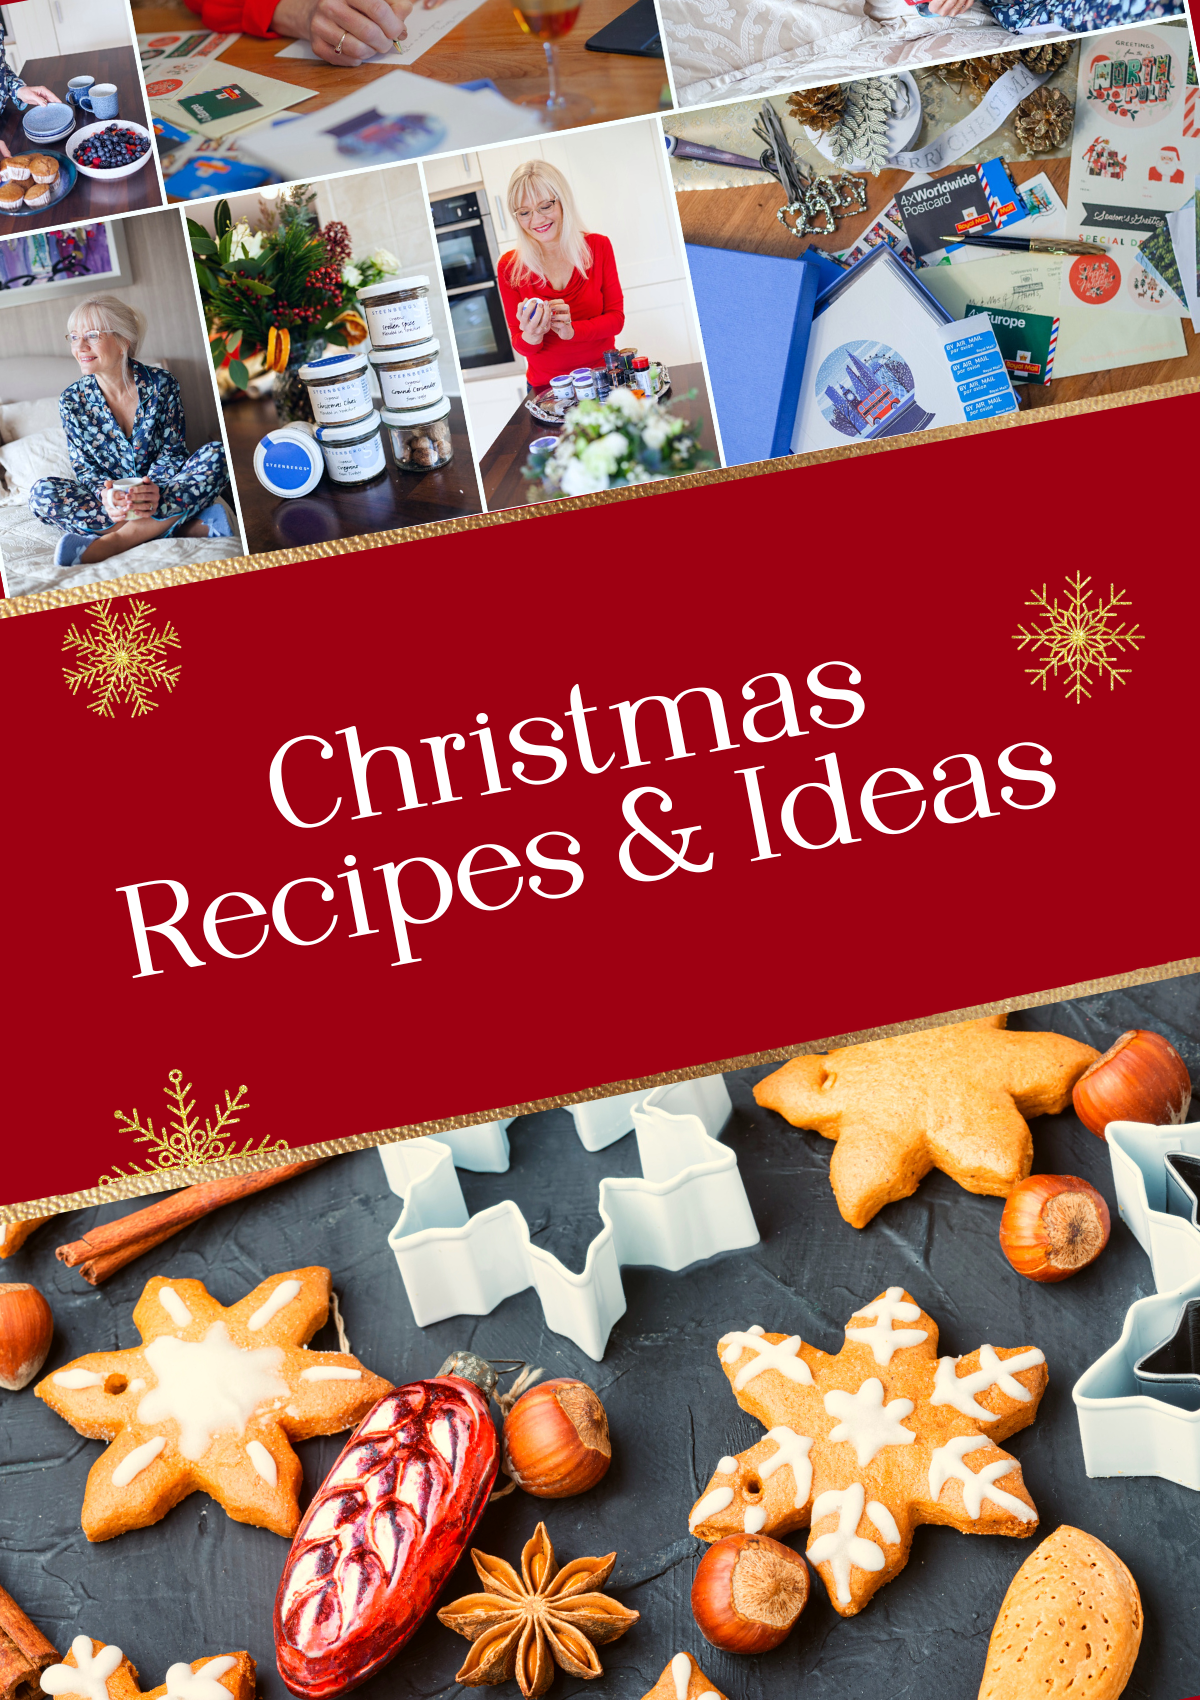 Christmas Ideas and Recipes - a montage of Christmas images